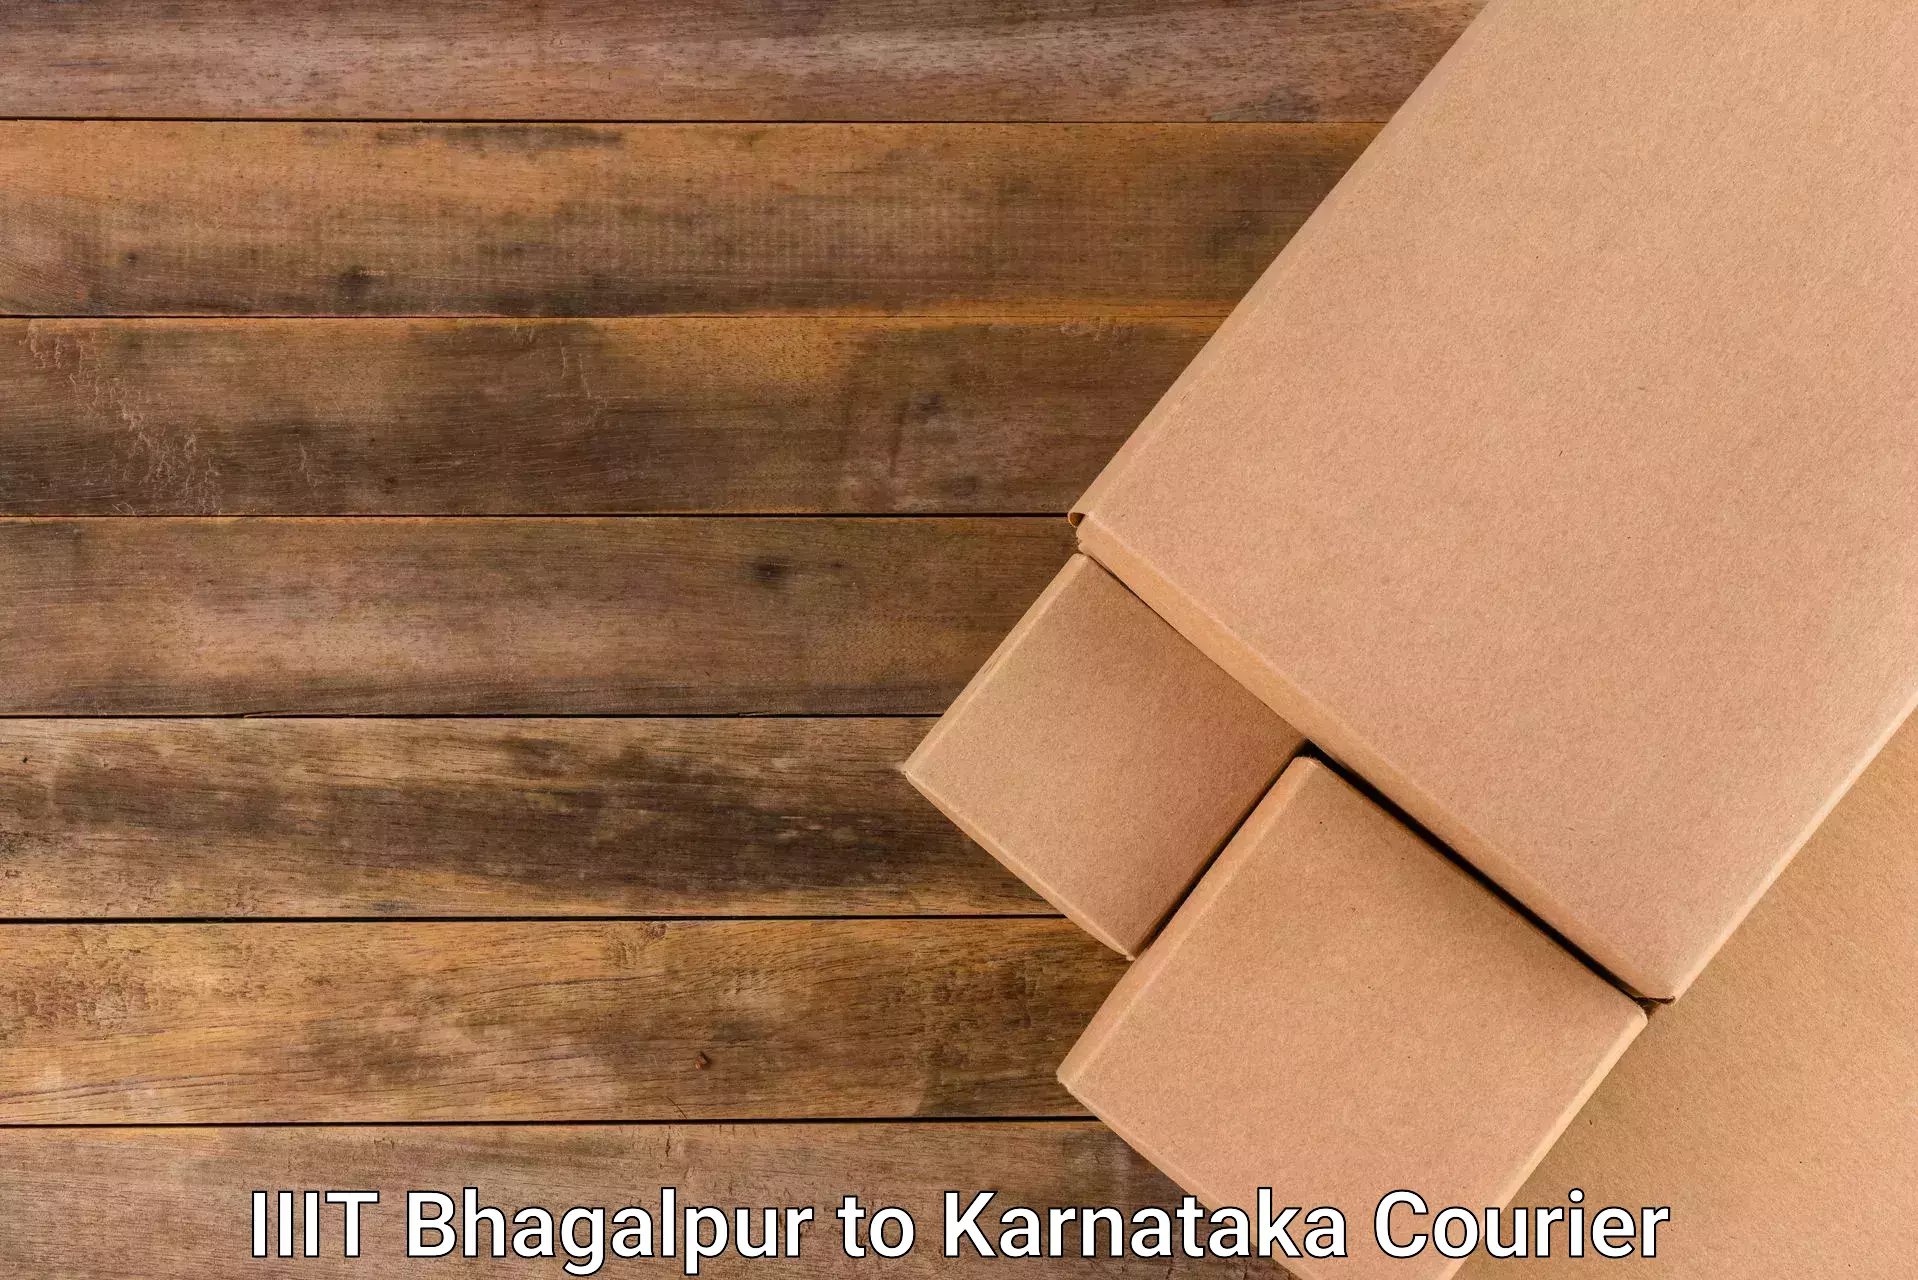 Affordable logistics services in IIIT Bhagalpur to Siruguppa